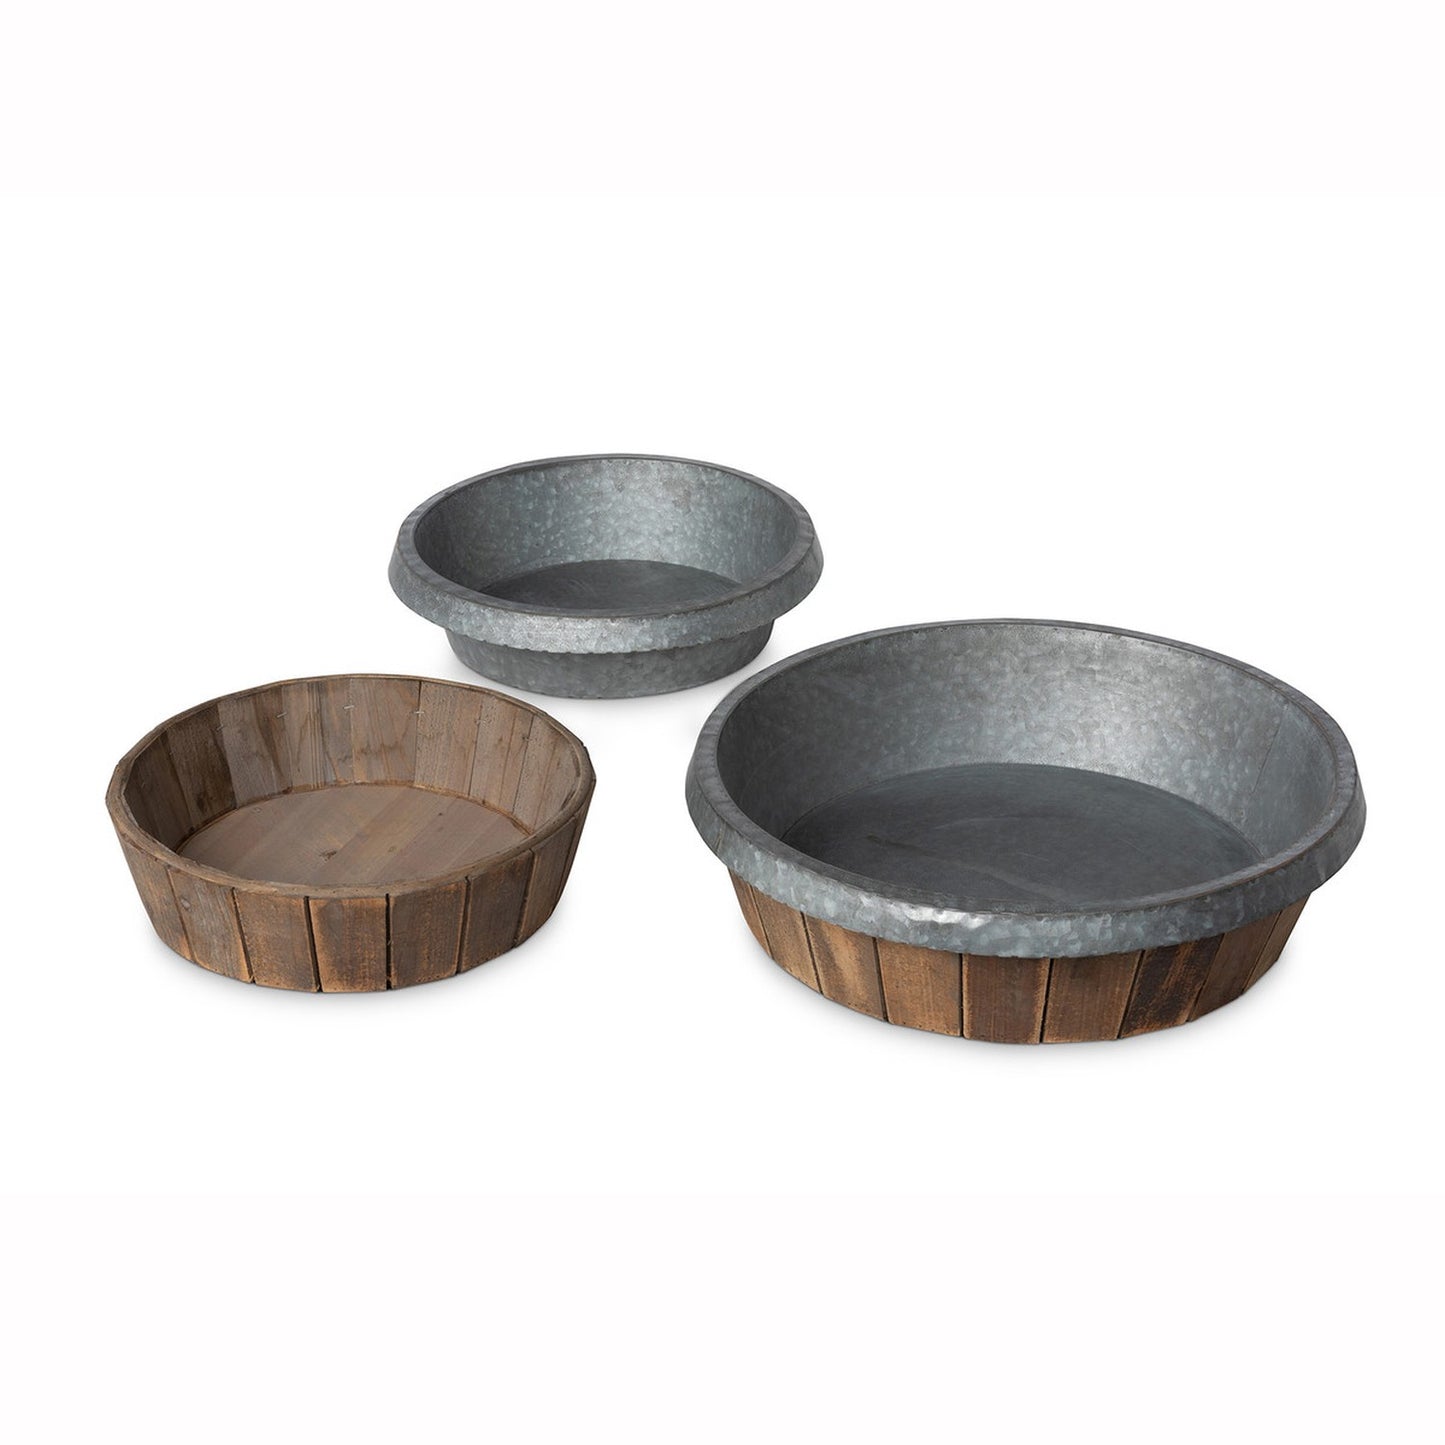 Park Hill Collection Garden Floral Galvanized Lined Round Wooden Trays Set of 2